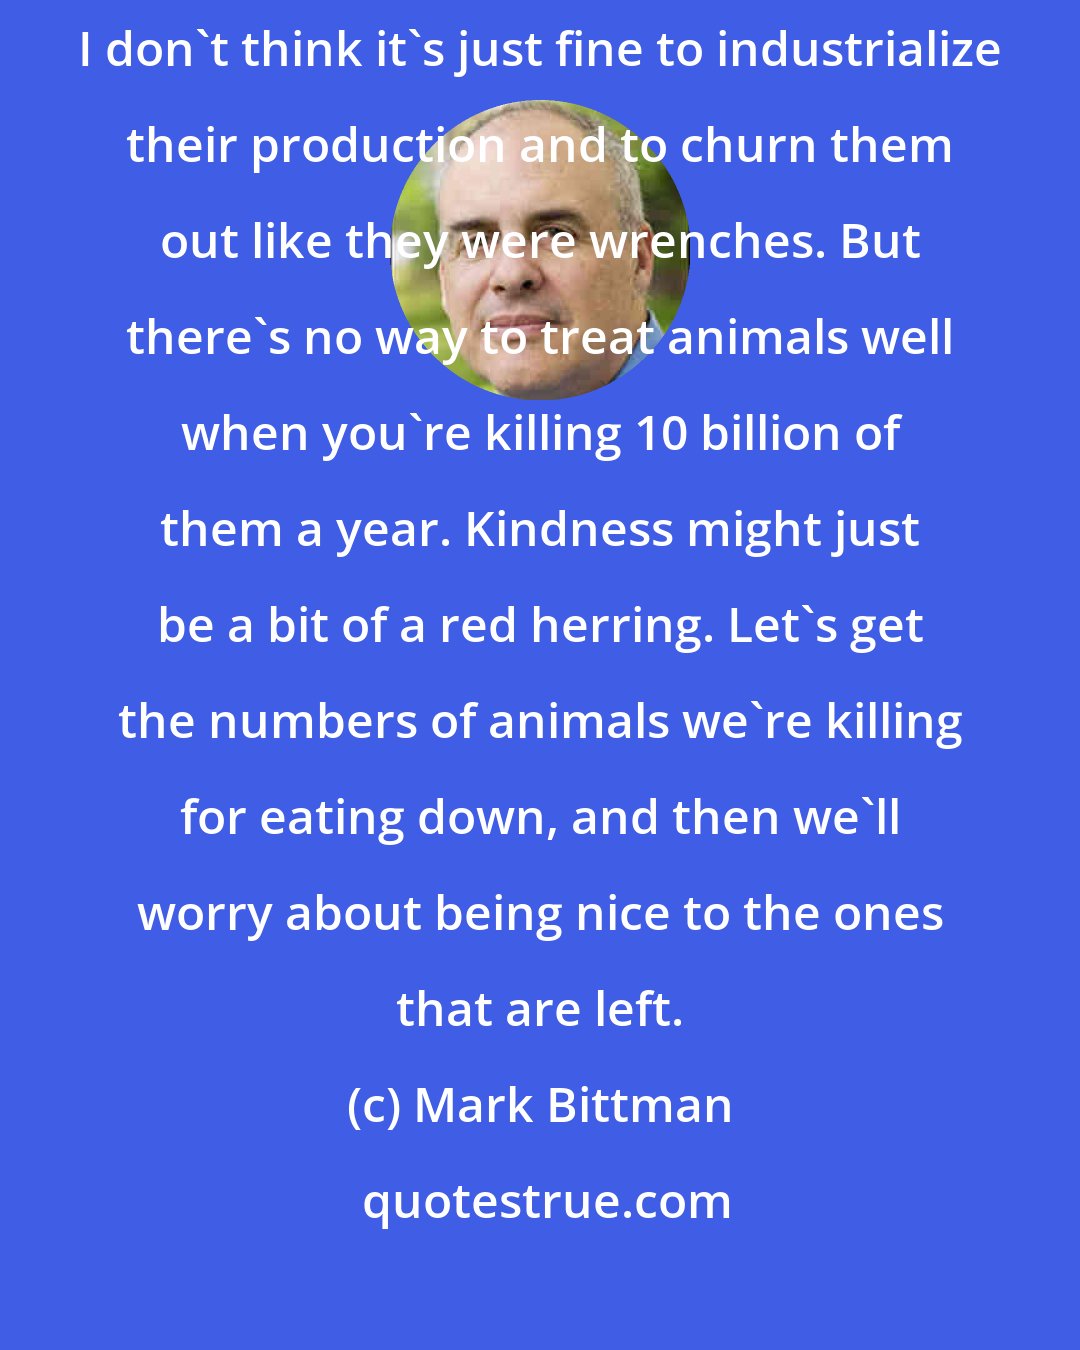 Mark Bittman: I'm not a vegetarian. Now, don't get me wrong - I like animals. And I don't think it's just fine to industrialize their production and to churn them out like they were wrenches. But there's no way to treat animals well when you're killing 10 billion of them a year. Kindness might just be a bit of a red herring. Let's get the numbers of animals we're killing for eating down, and then we'll worry about being nice to the ones that are left.